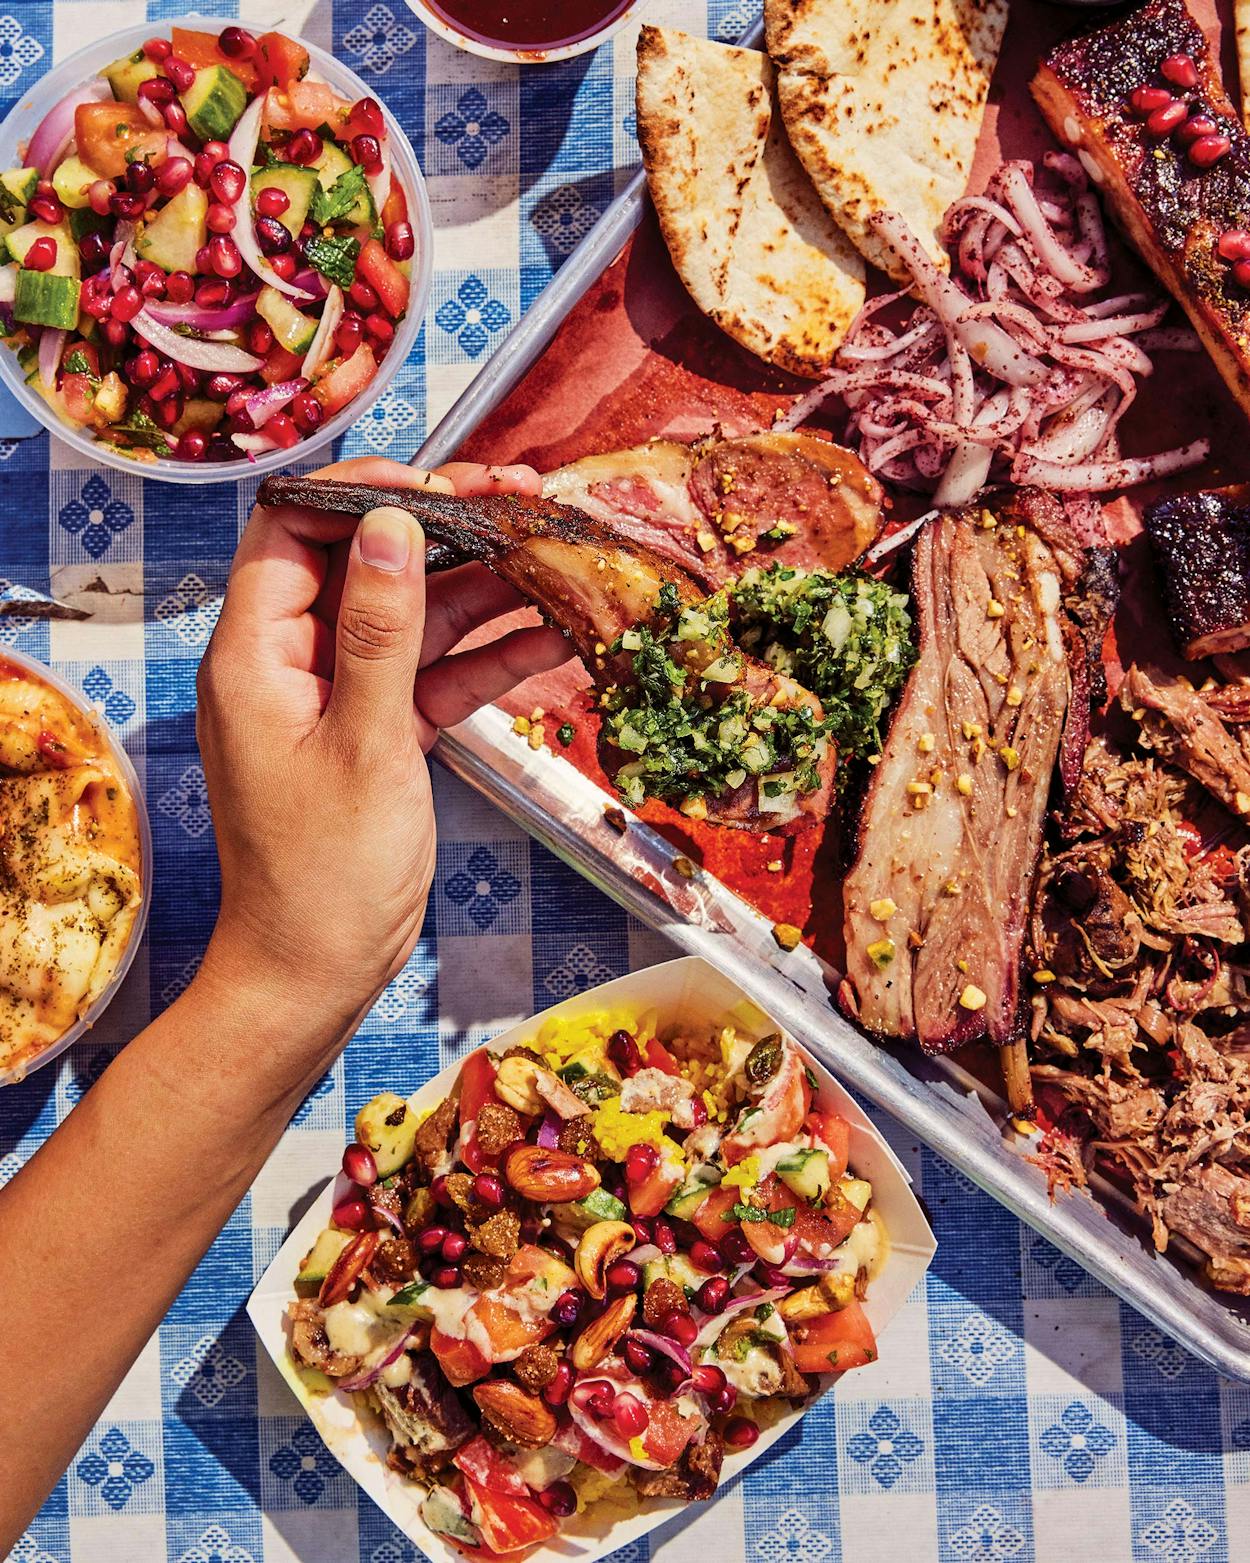 A spread from KG BBQ in Austin.